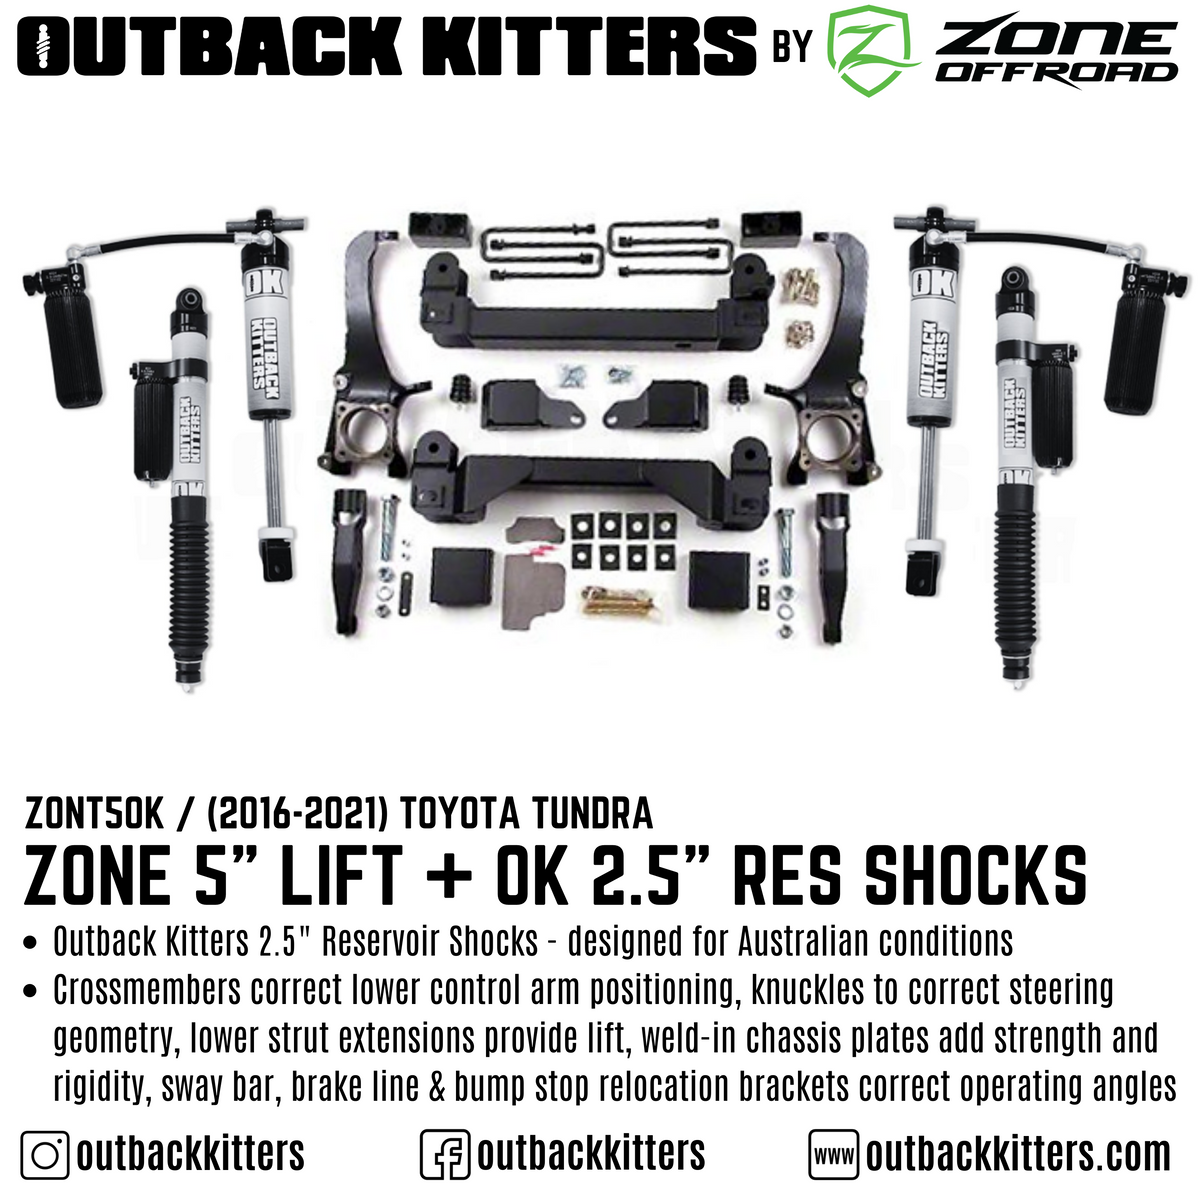 OK by Zone 5" Lift Kit + Outback Kitters 2.5" Reservoir Shocks for  2007-2021 Toyota Tundra - Outback Kitters